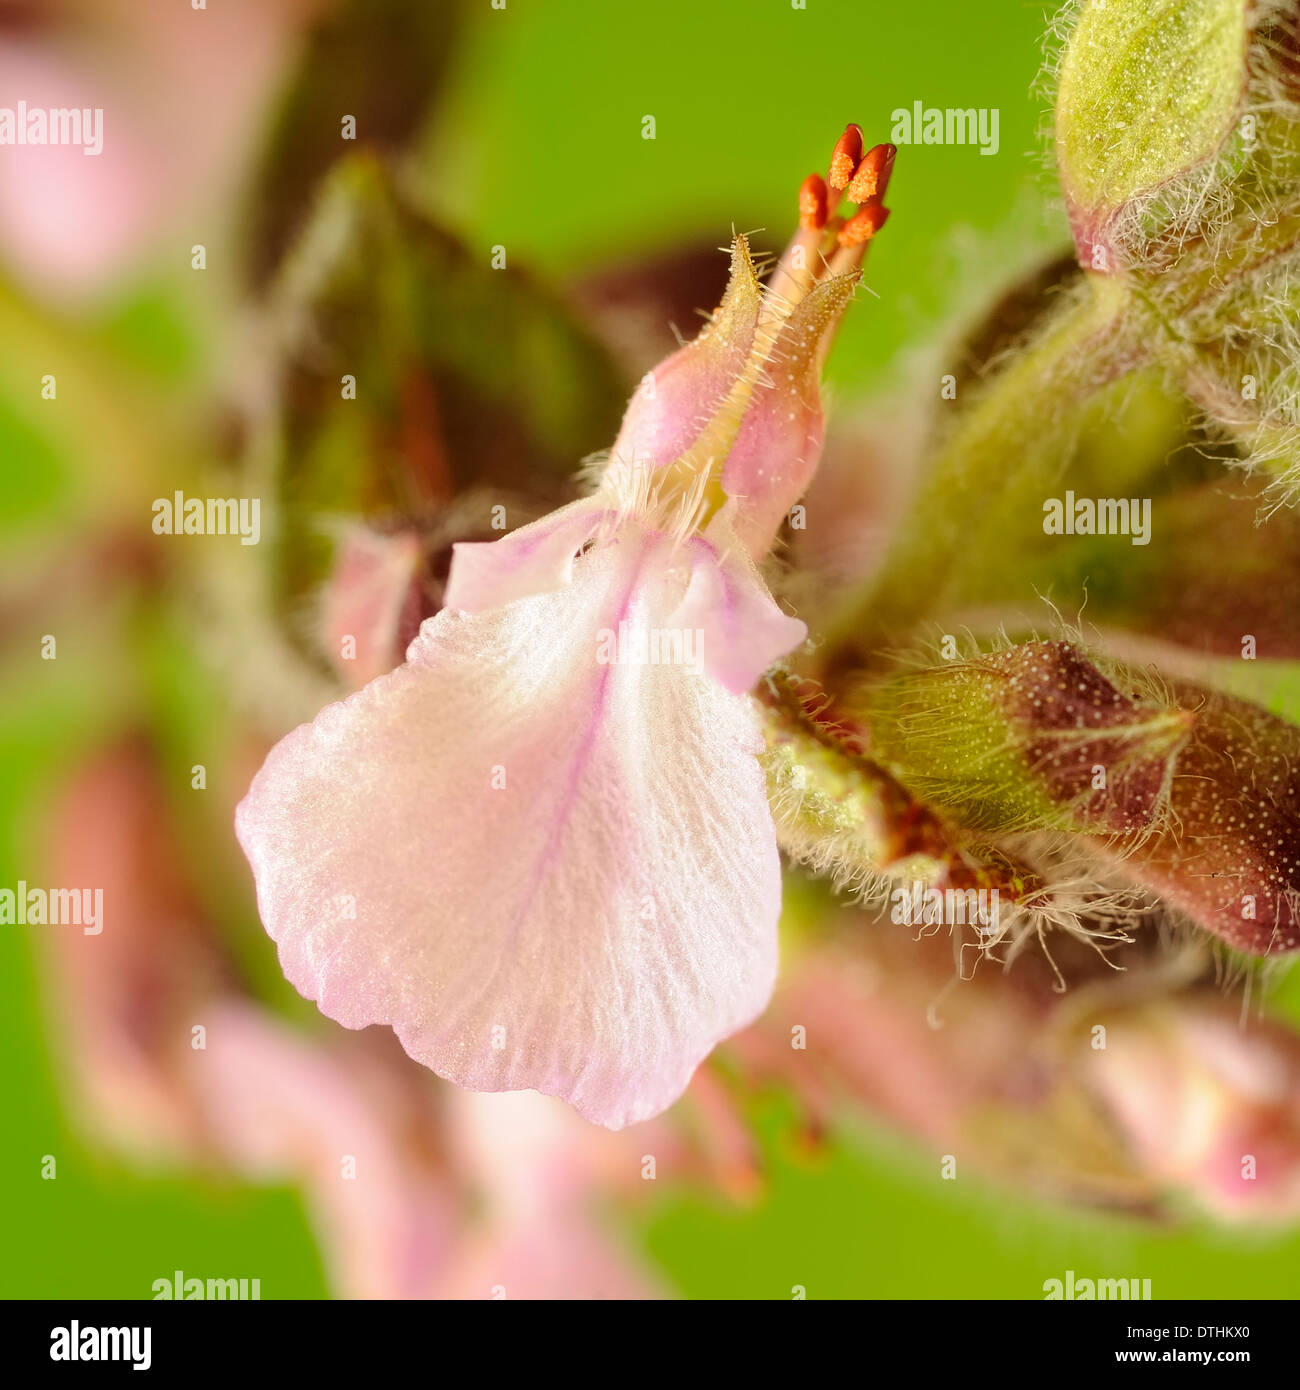 Wall germander, Teucrium chamaedrys, portrait of flower with out of focus background. Stock Photo